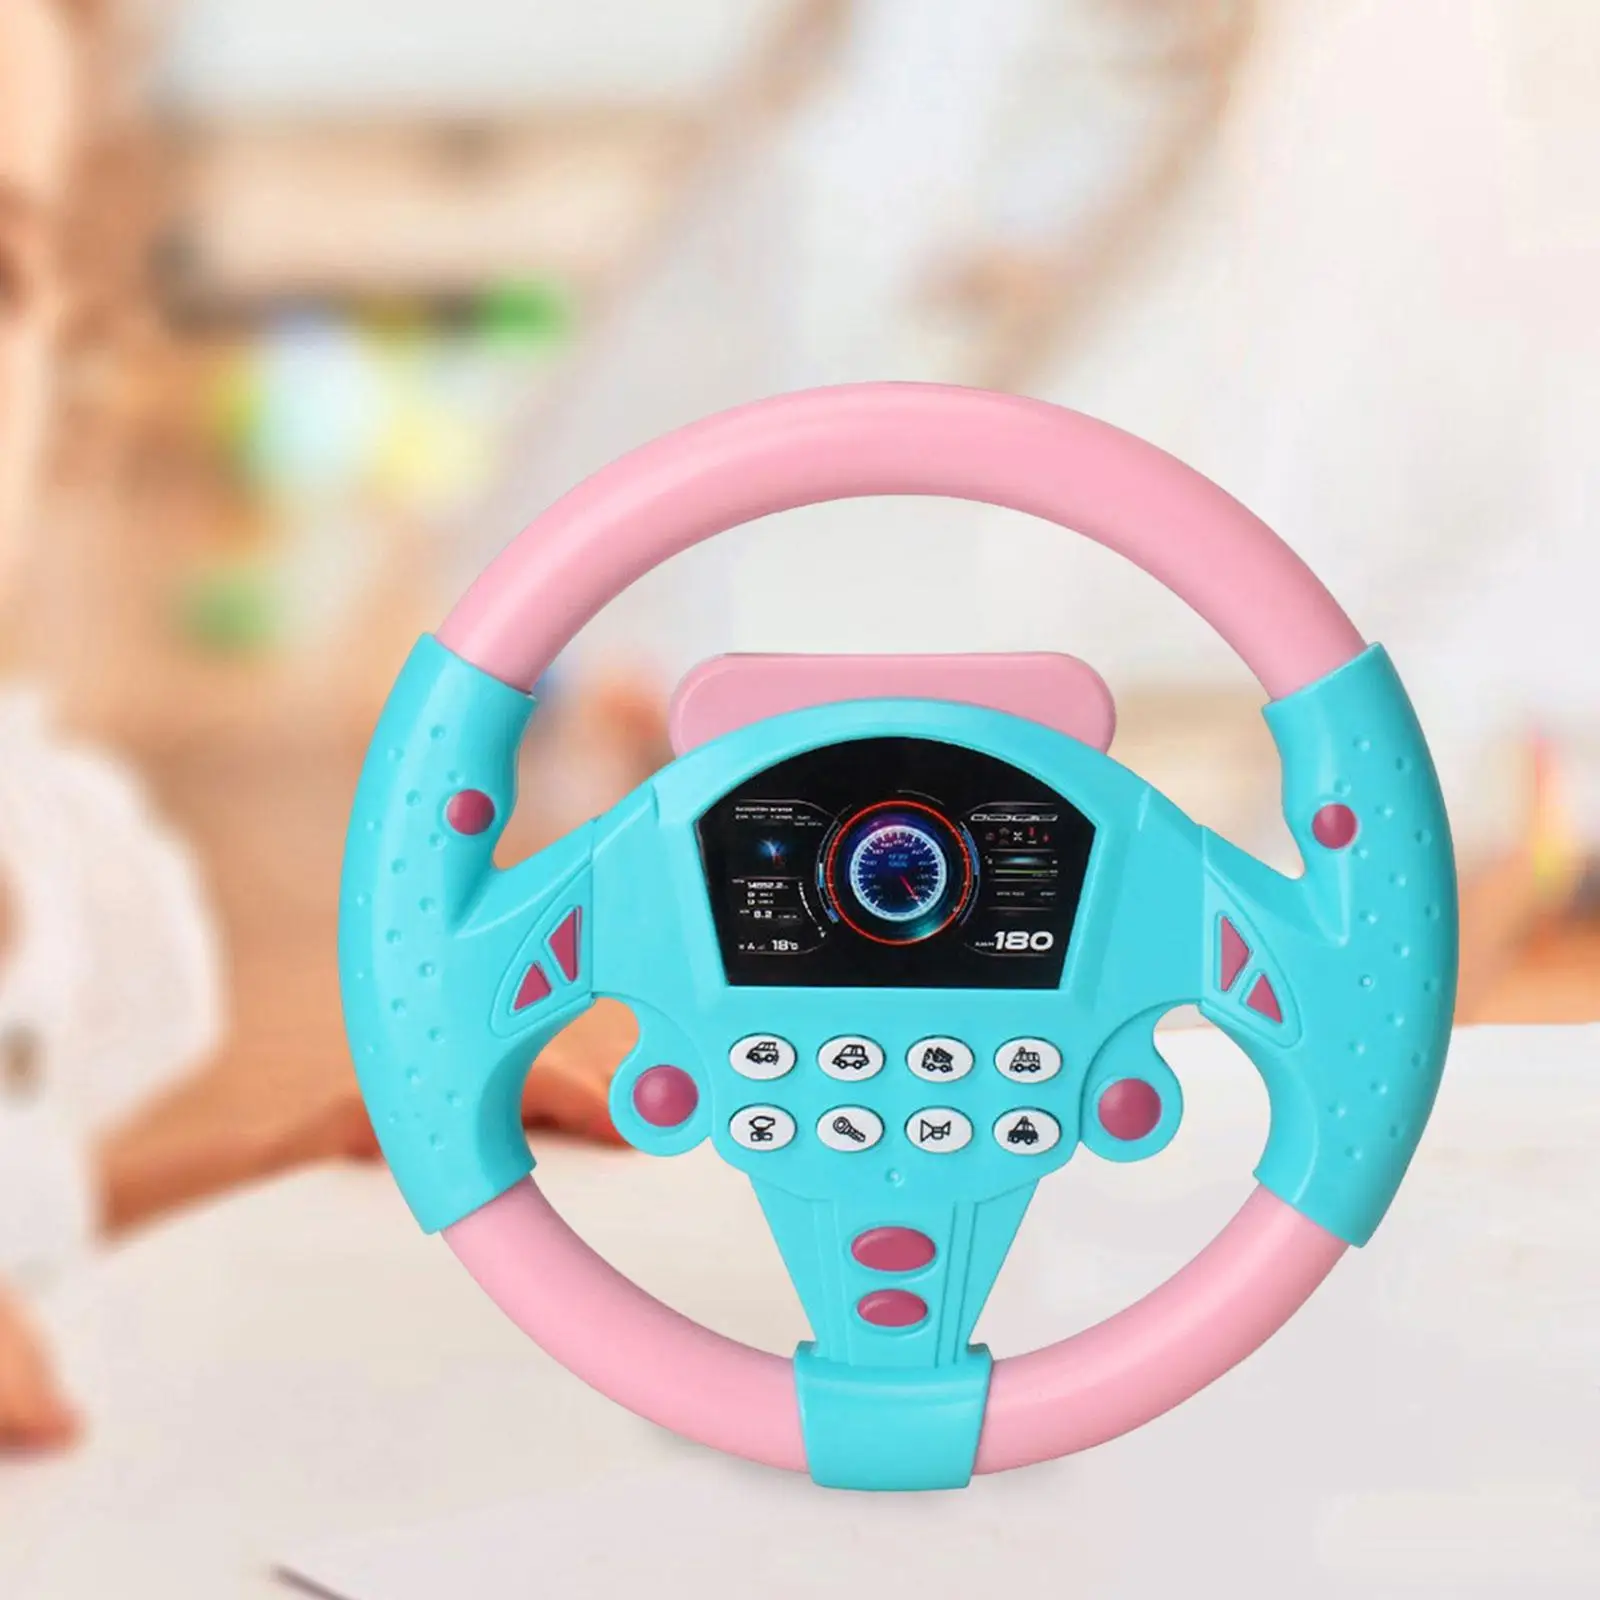 Simulation Driving Wheel Toy Educational Learning Toy for Boys Children Kids Toddlers